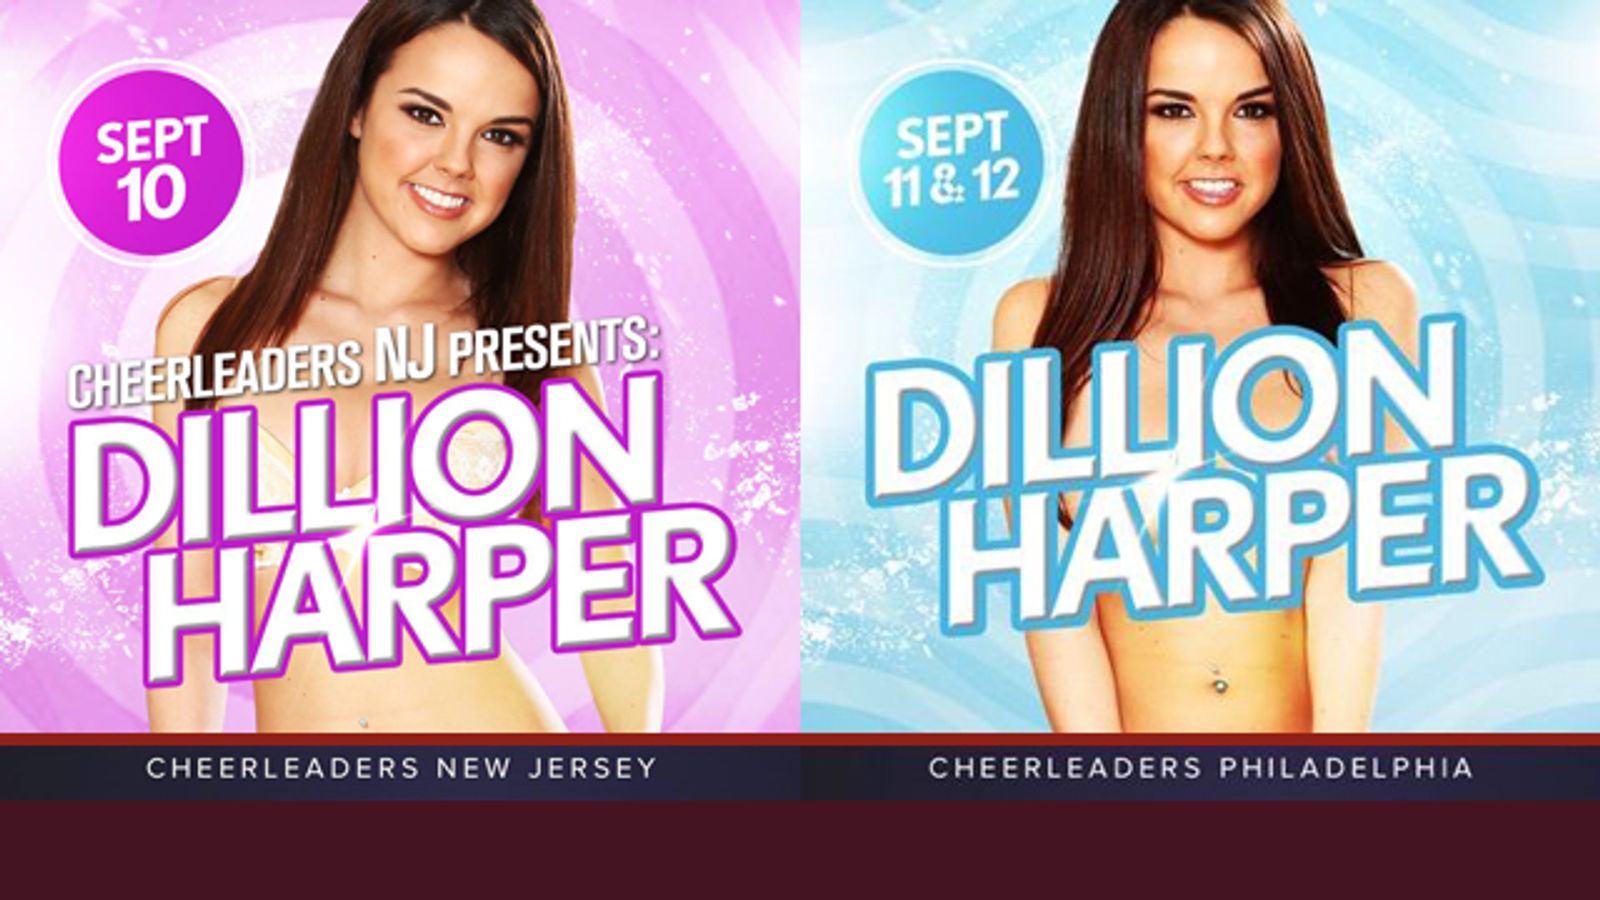 Dillion Harper Features at Two Cheerleaders Locations September 10 - 12